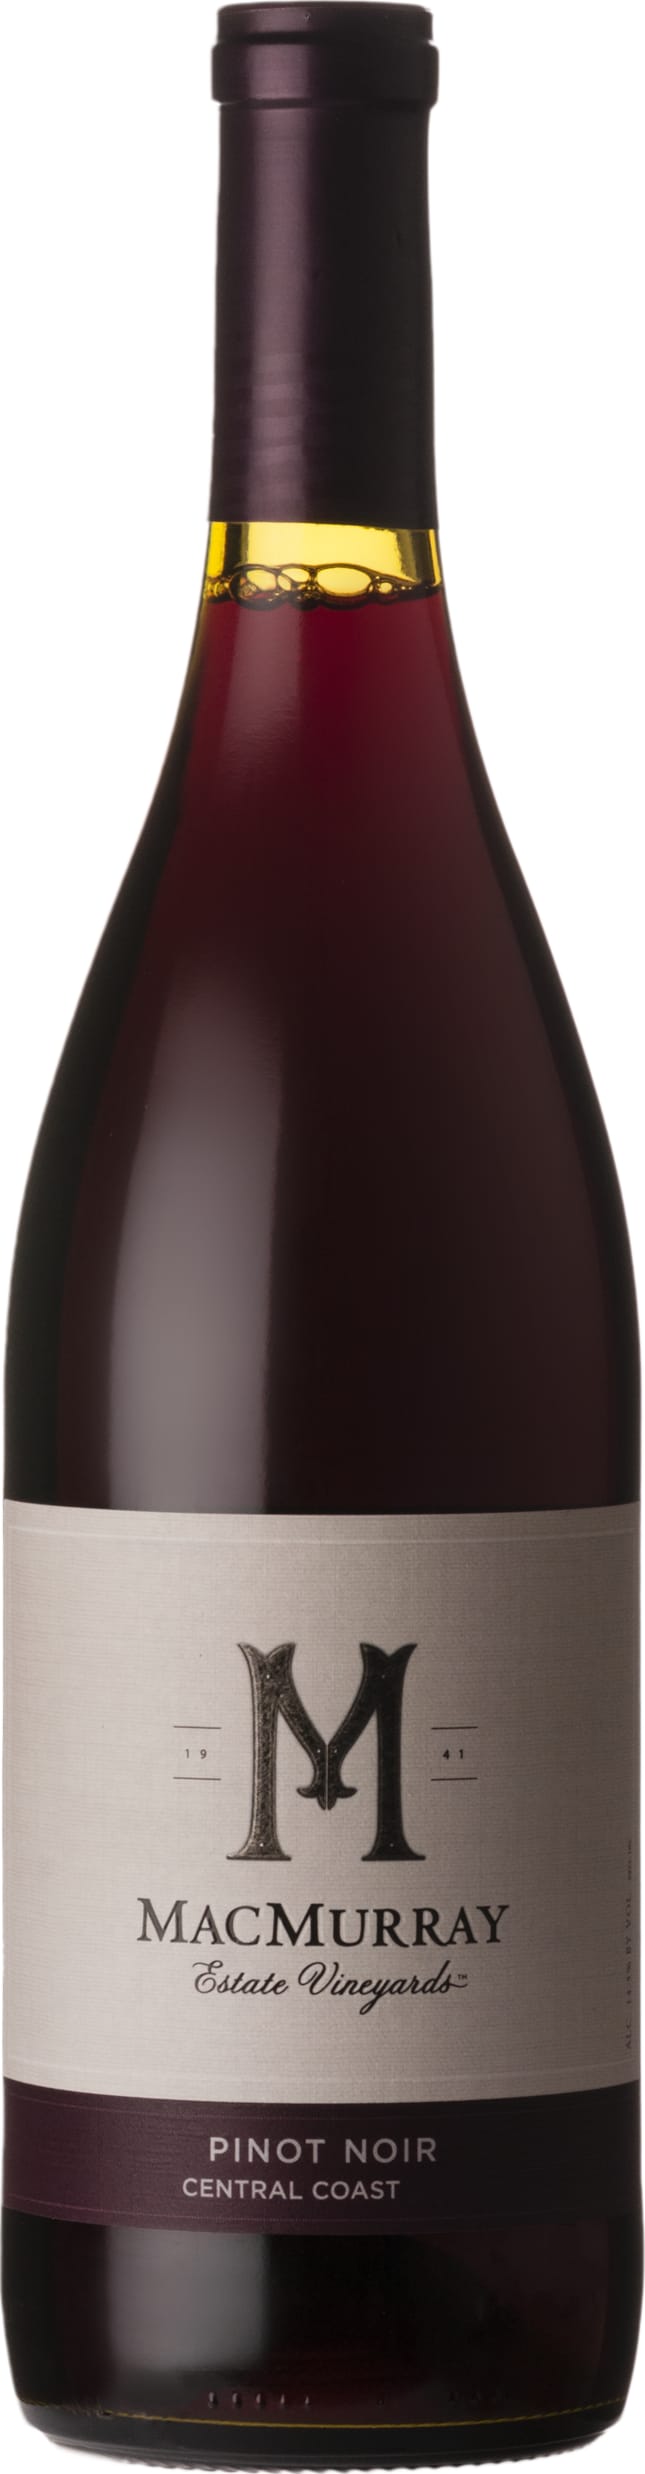 MacMurray Estate Vineyards Central Coast Pinot Noir 2020 75cl - Buy MacMurray Estate Vineyards Wines from GREAT WINES DIRECT wine shop